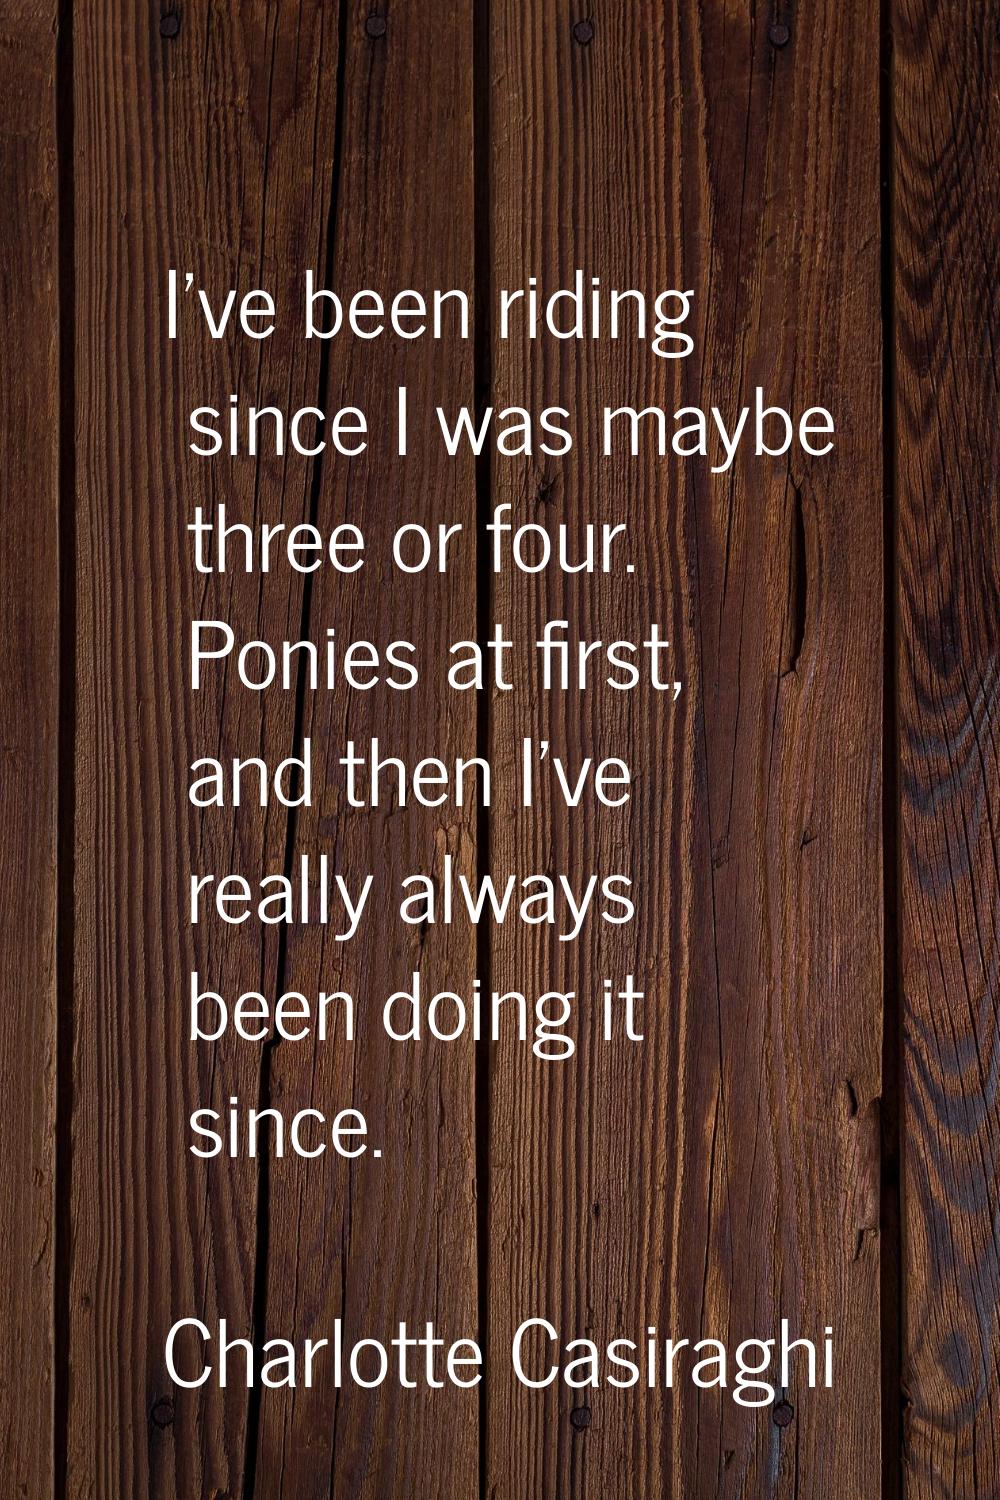 I've been riding since I was maybe three or four. Ponies at first, and then I've really always been